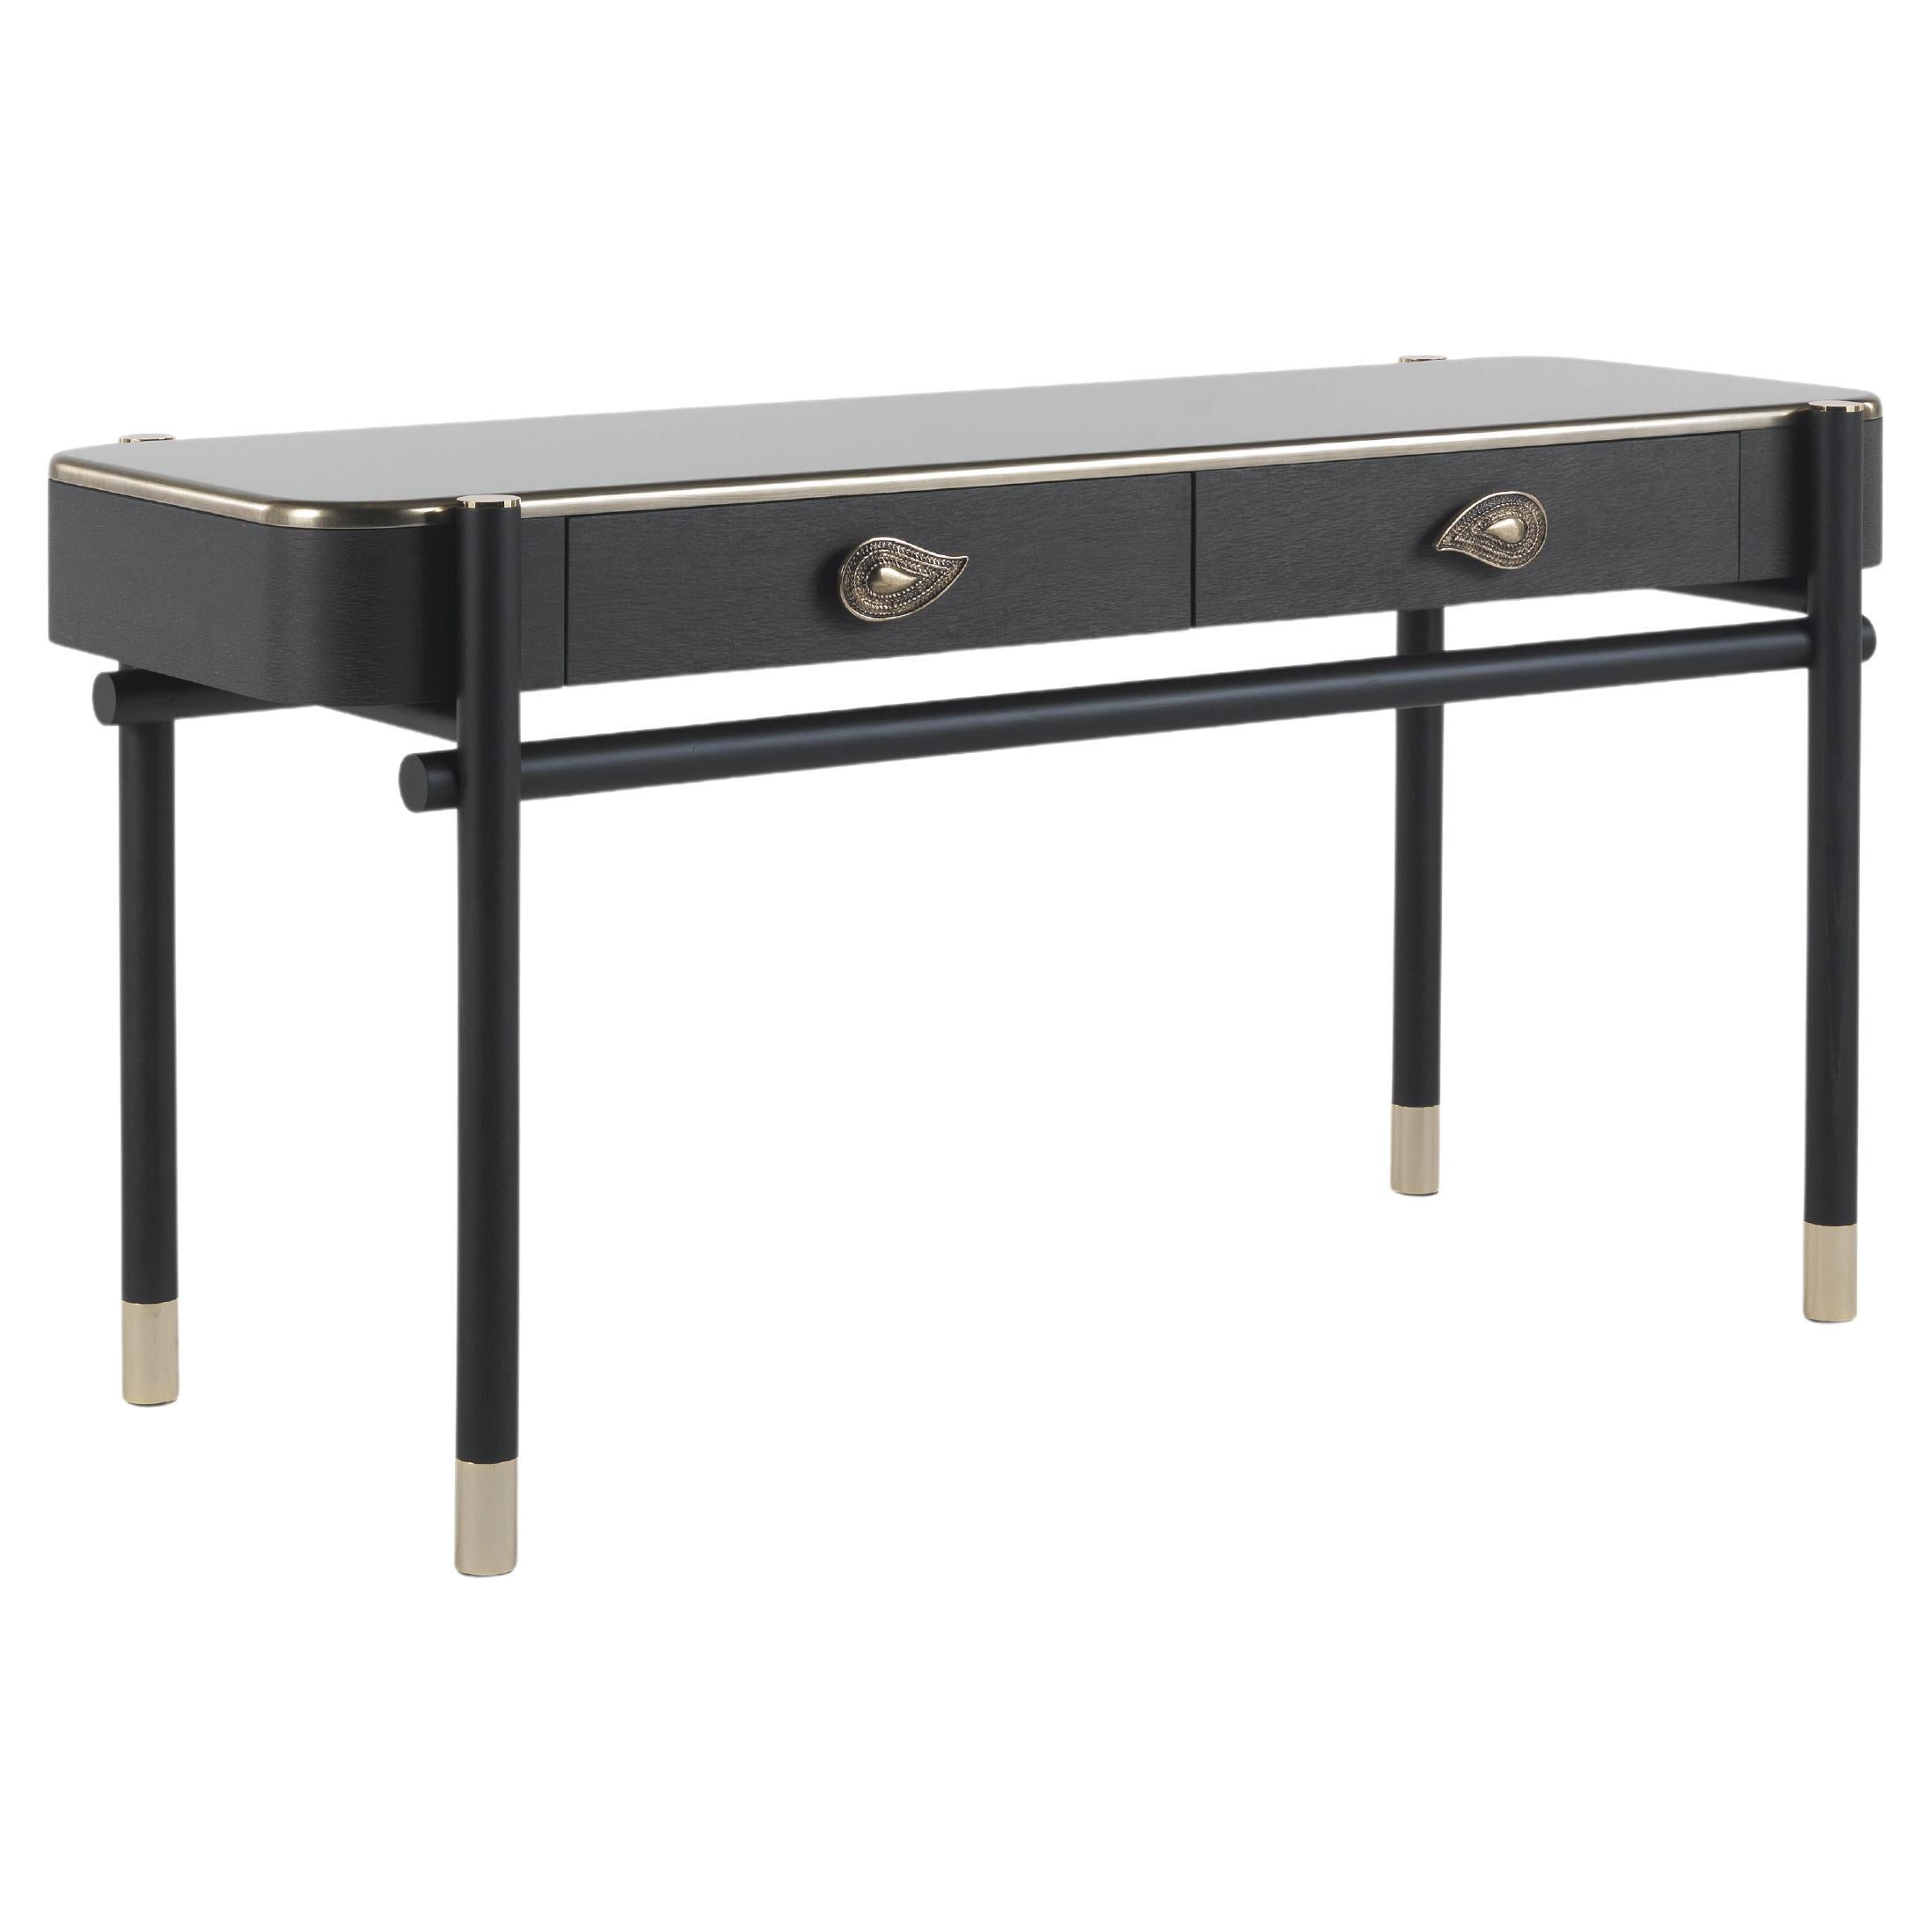 A warm combination of essences and finishes for the Woodstock dressing table, a piece of furniture that completes Woodstock collection launched in 2018. The structure is in matte dark wengè dyed wood, the top is in patinated gold liquid metal